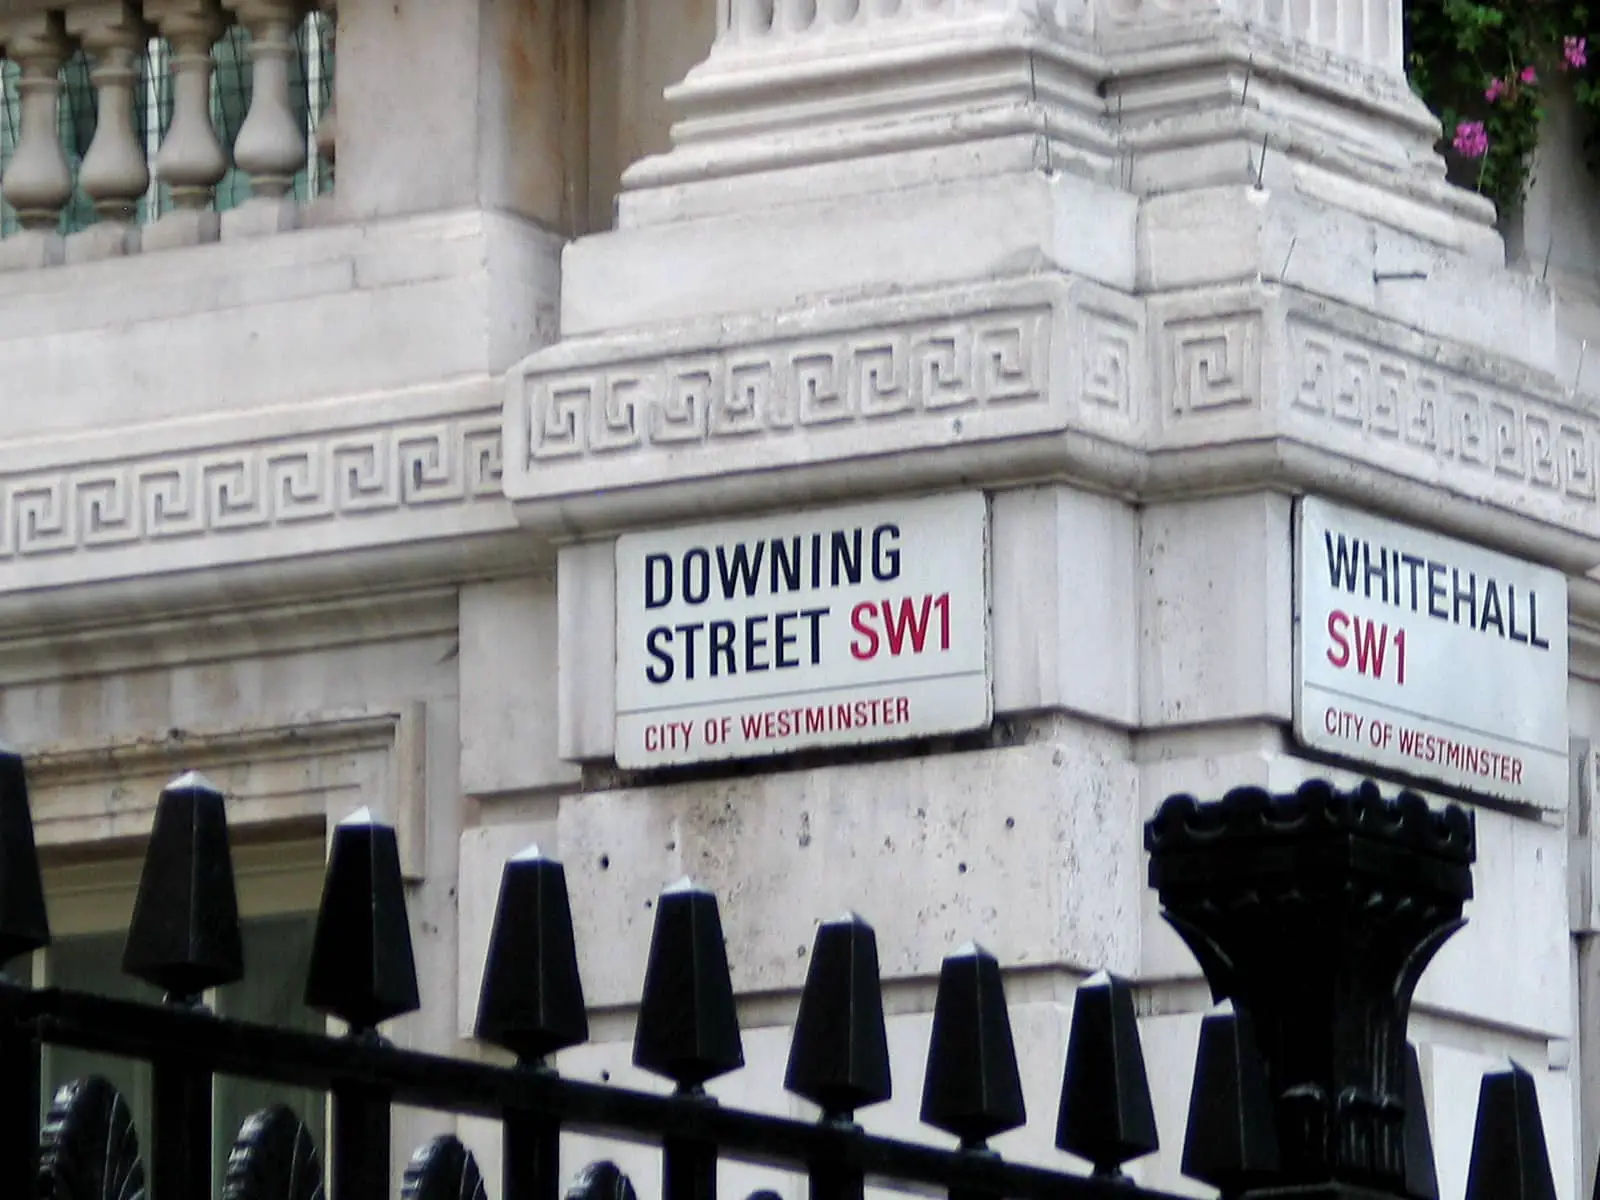 Downing Street road sign and railings